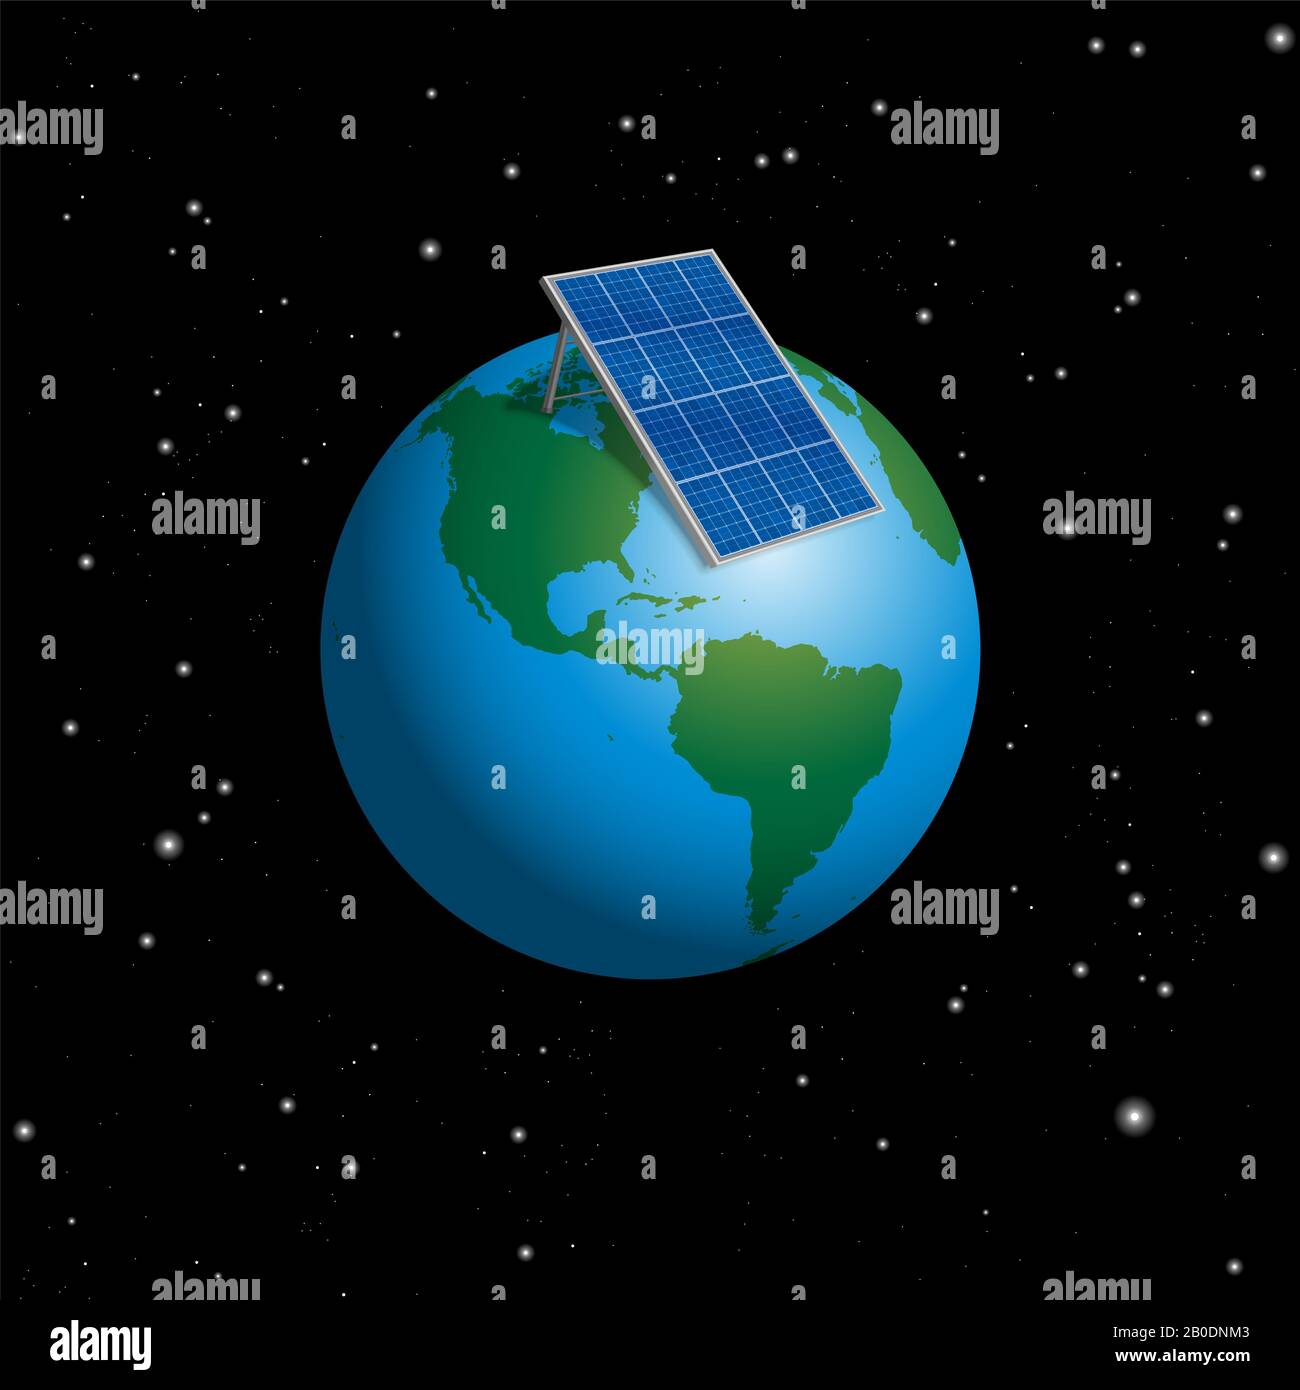 Planet earth with solar plate collector or photovoltaic panel to supply the whole world with electric power - 3d illustration on black background. Stock Photo